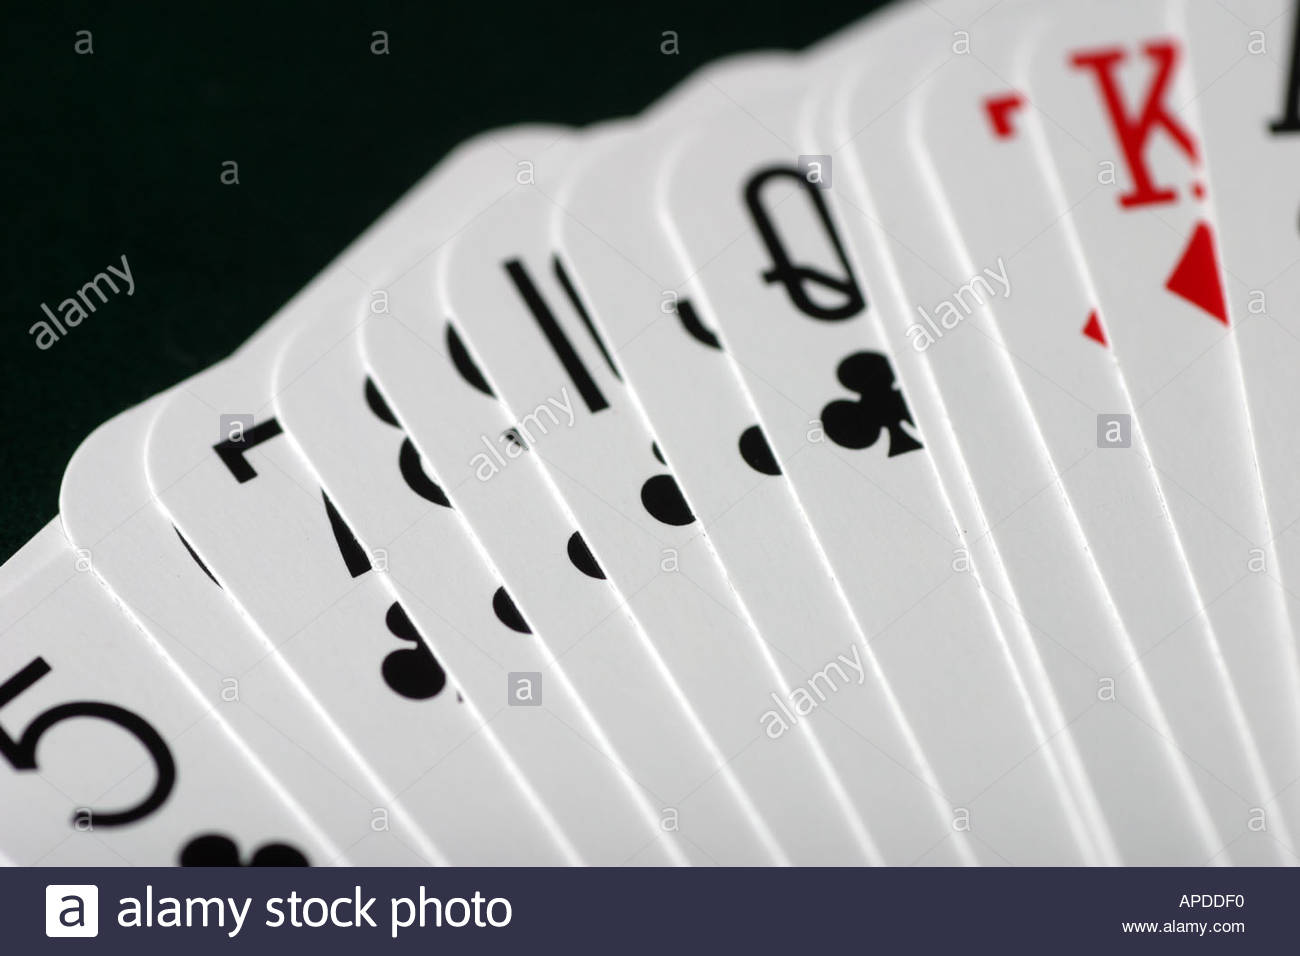 Playcards Stock Photos & Playcards Stock Images - Alamy